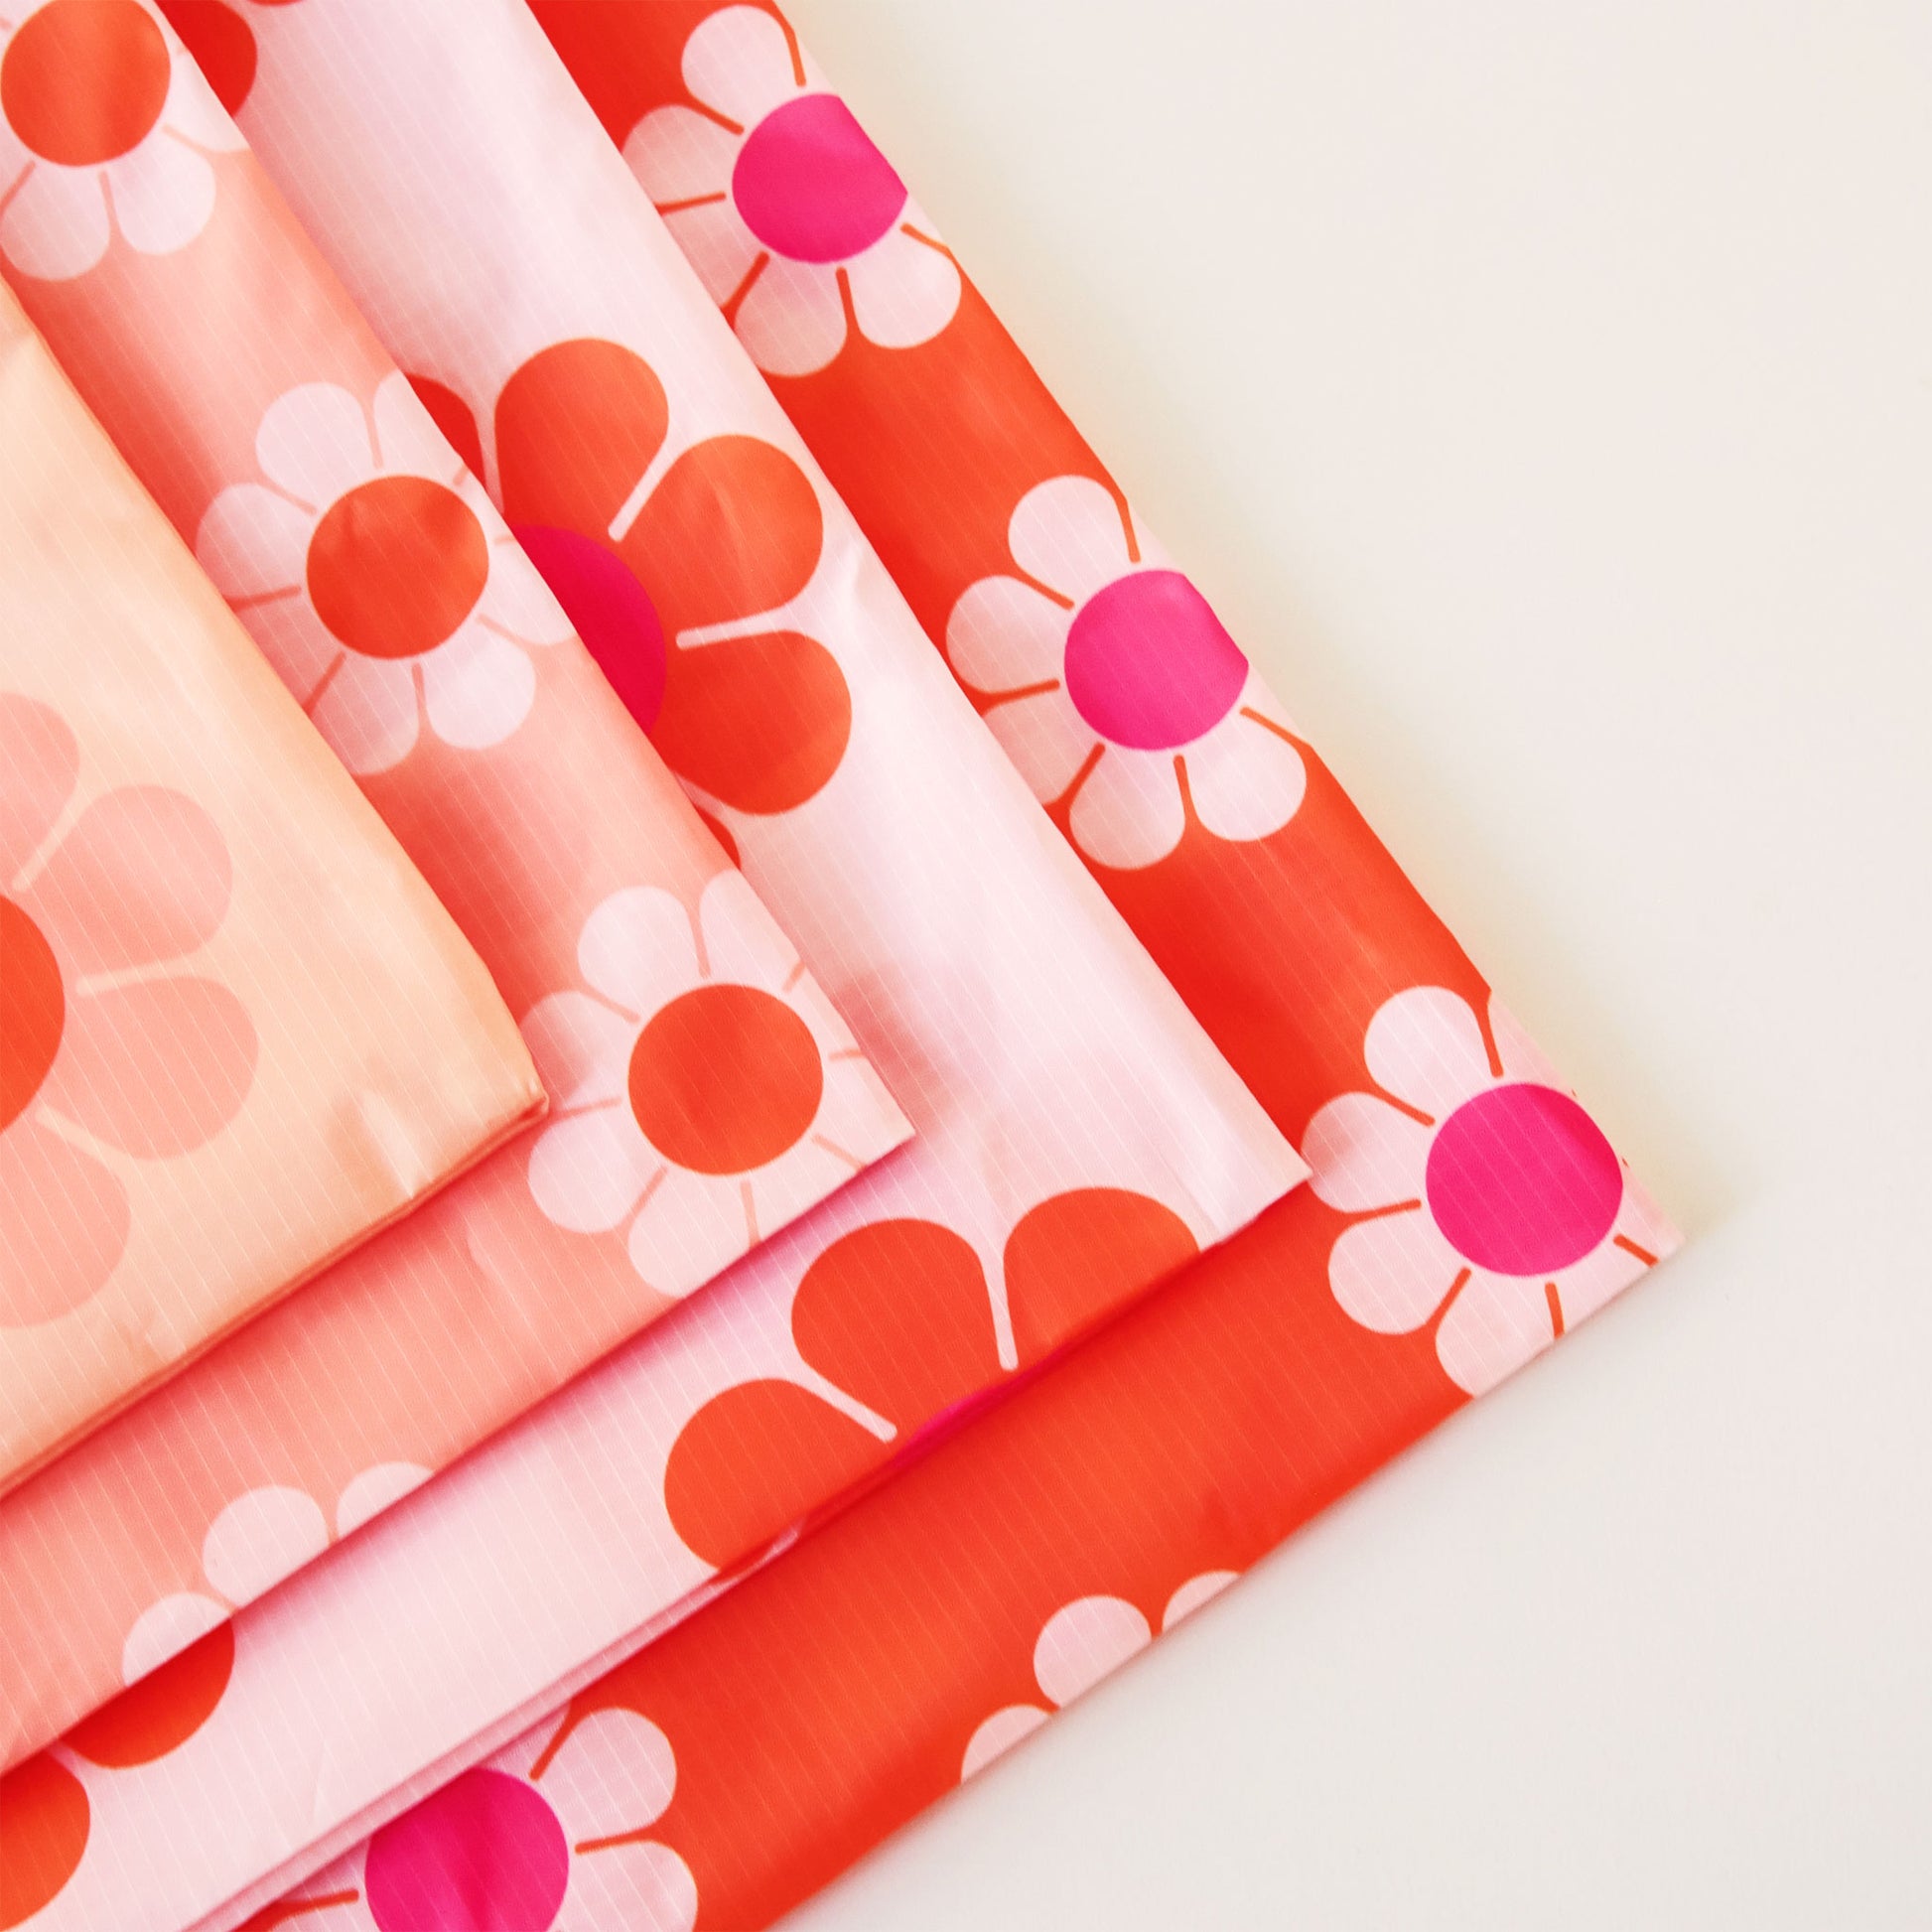 Zoomed in view of the corners of four reusable bags. Each bag has similar print of daisies but in different combinations of peach, orange and pink.